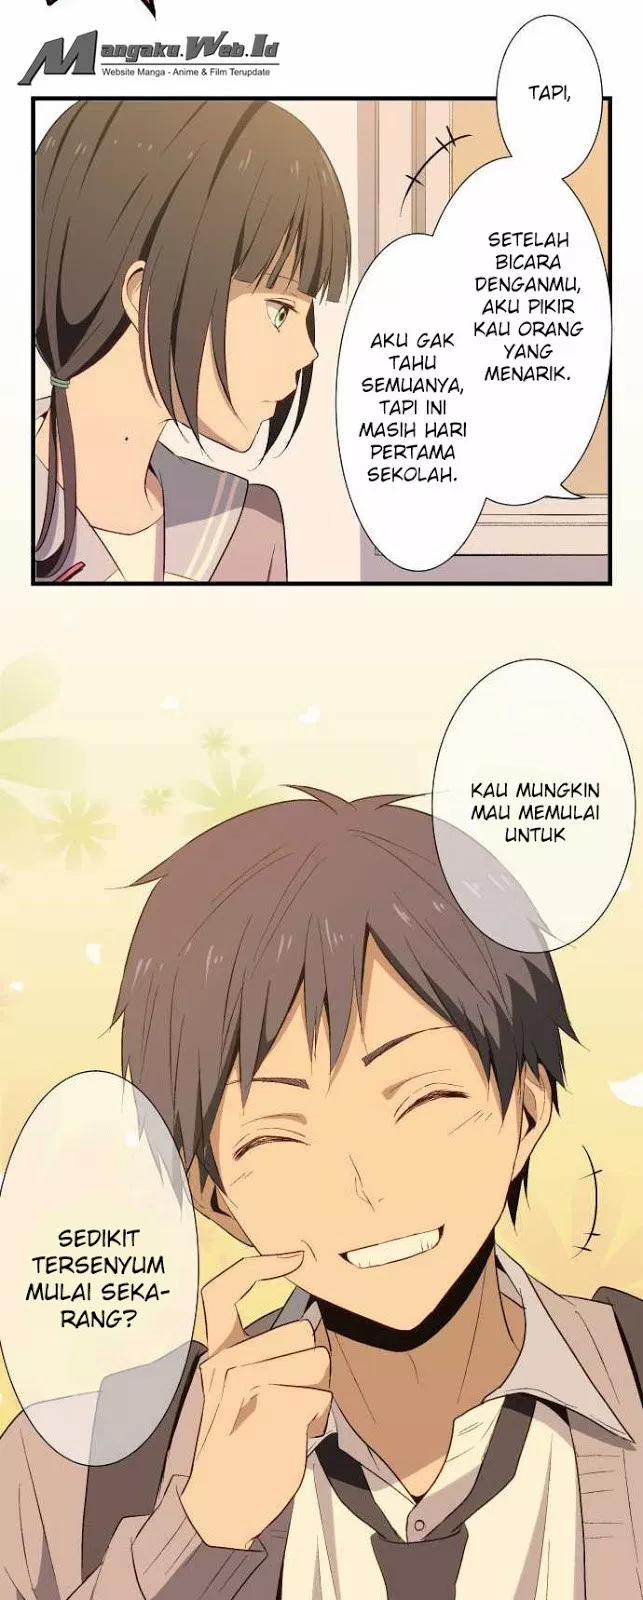 ReLIFE Chapter 17